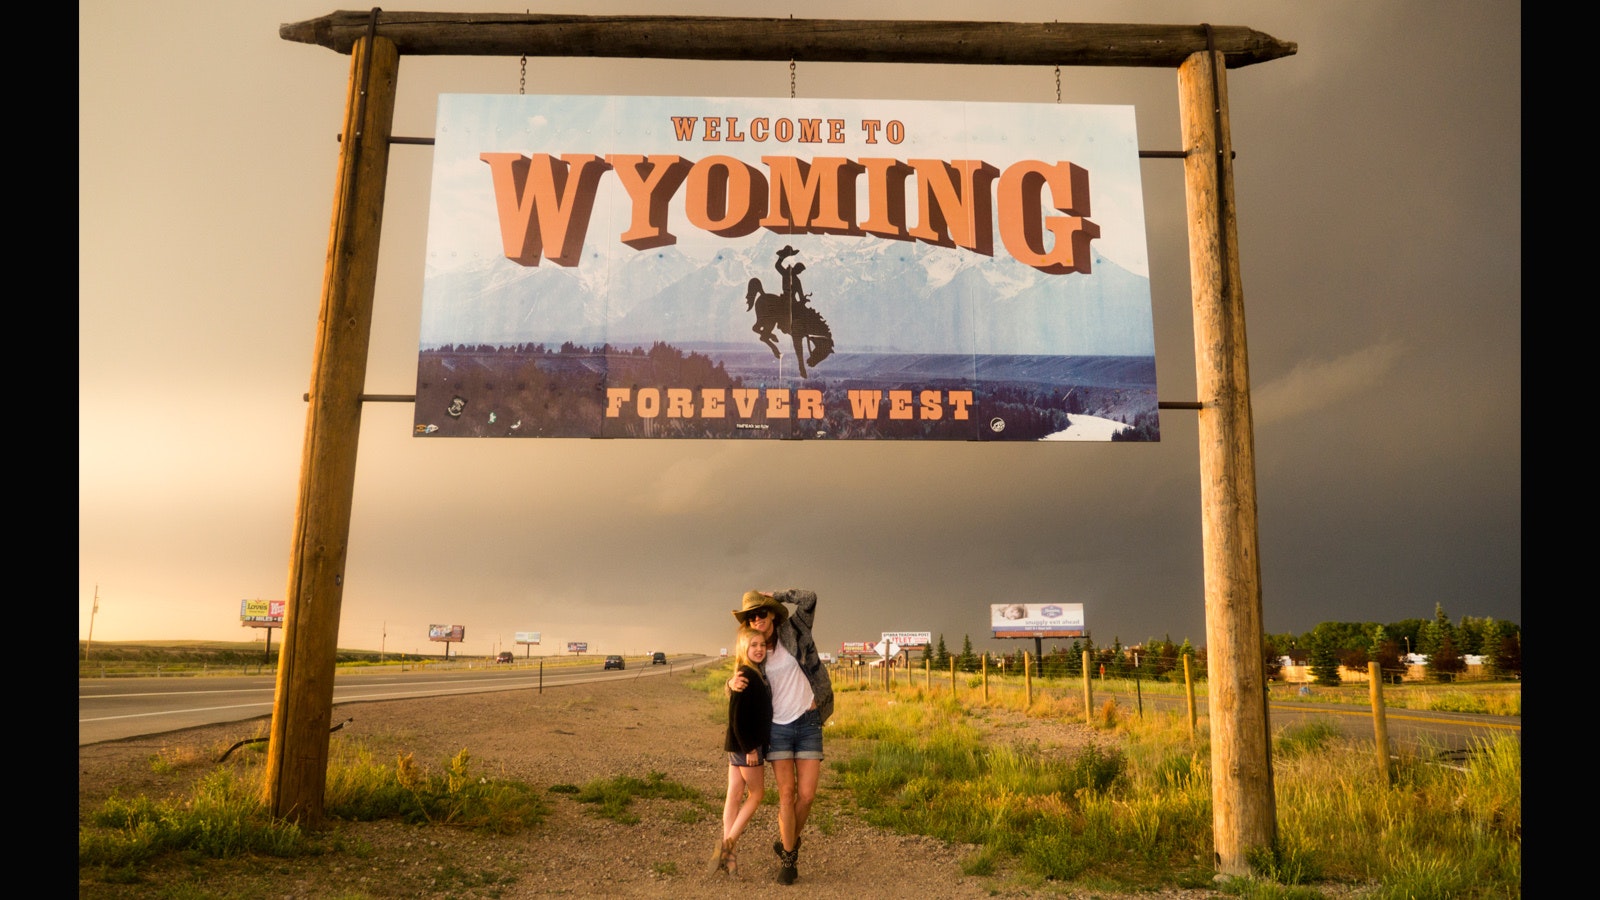 Welcome to wyoming sign 12 17 22